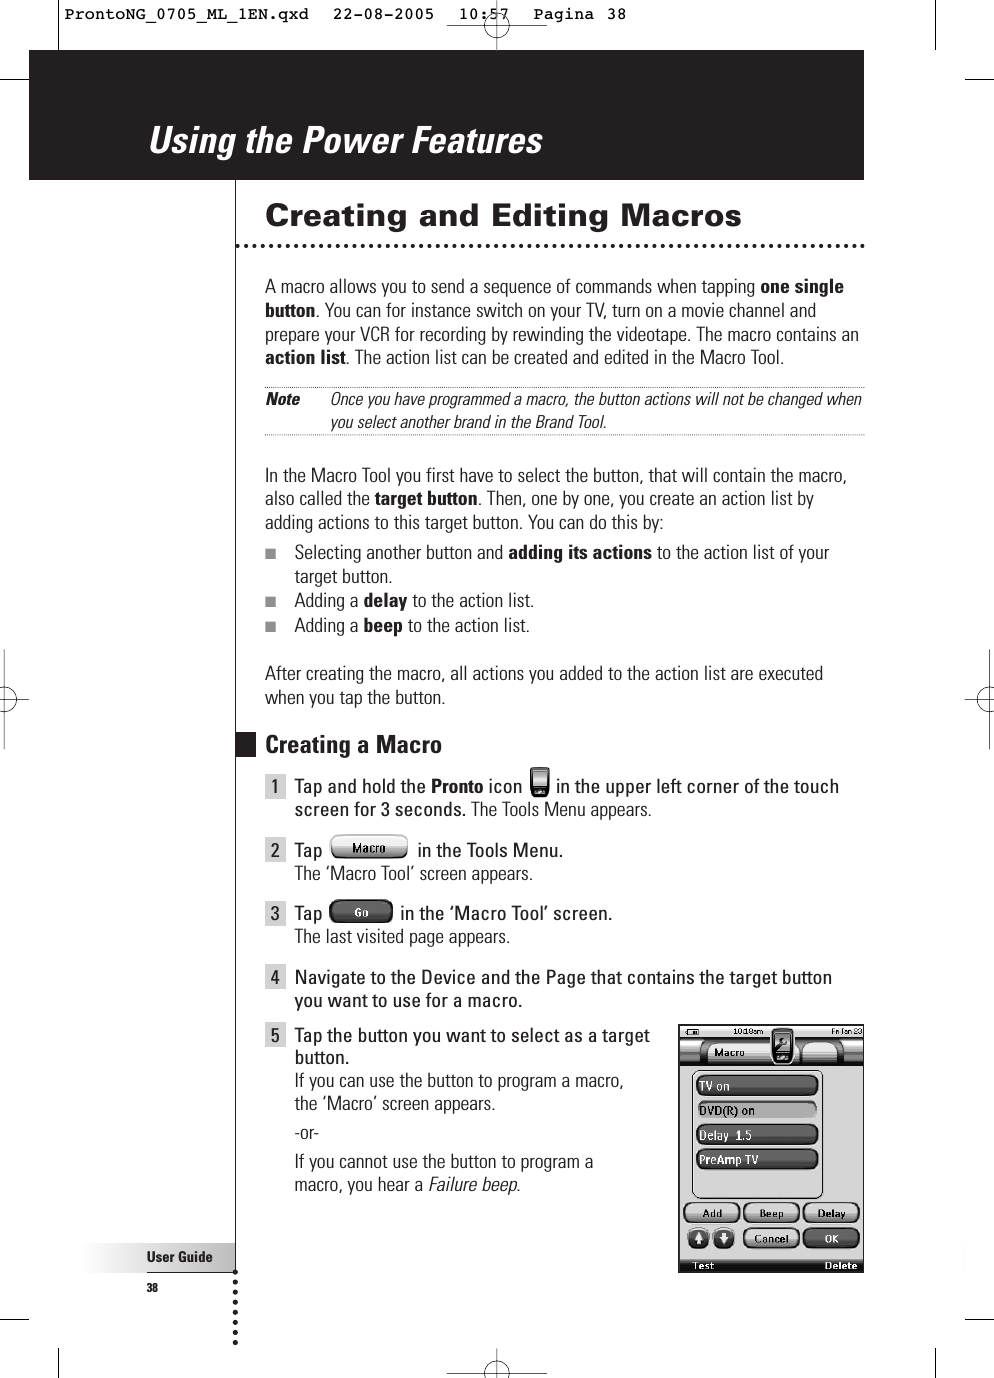 User Guide38Creating and Editing MacrosA macro allows you to send a sequence of commands when tapping one singlebutton. You can for instance switch on your TV, turn on a movie channel andprepare your VCR for recording by rewinding the videotape. The macro contains anaction list. The action list can be created and edited in the Macro Tool.Note Once you have programmed a macro, the button actions will not be changed whenyou select another brand in the Brand Tool.In the Macro Tool you first have to select the button, that will contain the macro,also called the target button. Then, one by one, you create an action list byadding actions to this target button. You can do this by:■Selecting another button and adding its actions to the action list of yourtarget button.■Adding a delay to the action list.■Adding a beep to the action list.After creating the macro, all actions you added to the action list are executedwhen you tap the button.Creating a Macro1Tap and hold the Pronto icon  in the upper left corner of the touchscreen for 3 seconds. The Tools Menu appears.2Tap  in the Tools Menu. The ‘Macro Tool’ screen appears.3Tap  in the ‘Macro Tool’ screen.The last visited page appears.4Navigate to the Device and the Page that contains the target buttonyou want to use for a macro.5Tap the button you want to select as a target button.If you can use the button to program a macro, the ‘Macro’ screen appears.-or-If you cannot use the button to program a macro, you hear a Failure beep.Using the Power FeaturesProntoNG_0705_ML_1EN.qxd  22-08-2005  10:57  Pagina 38